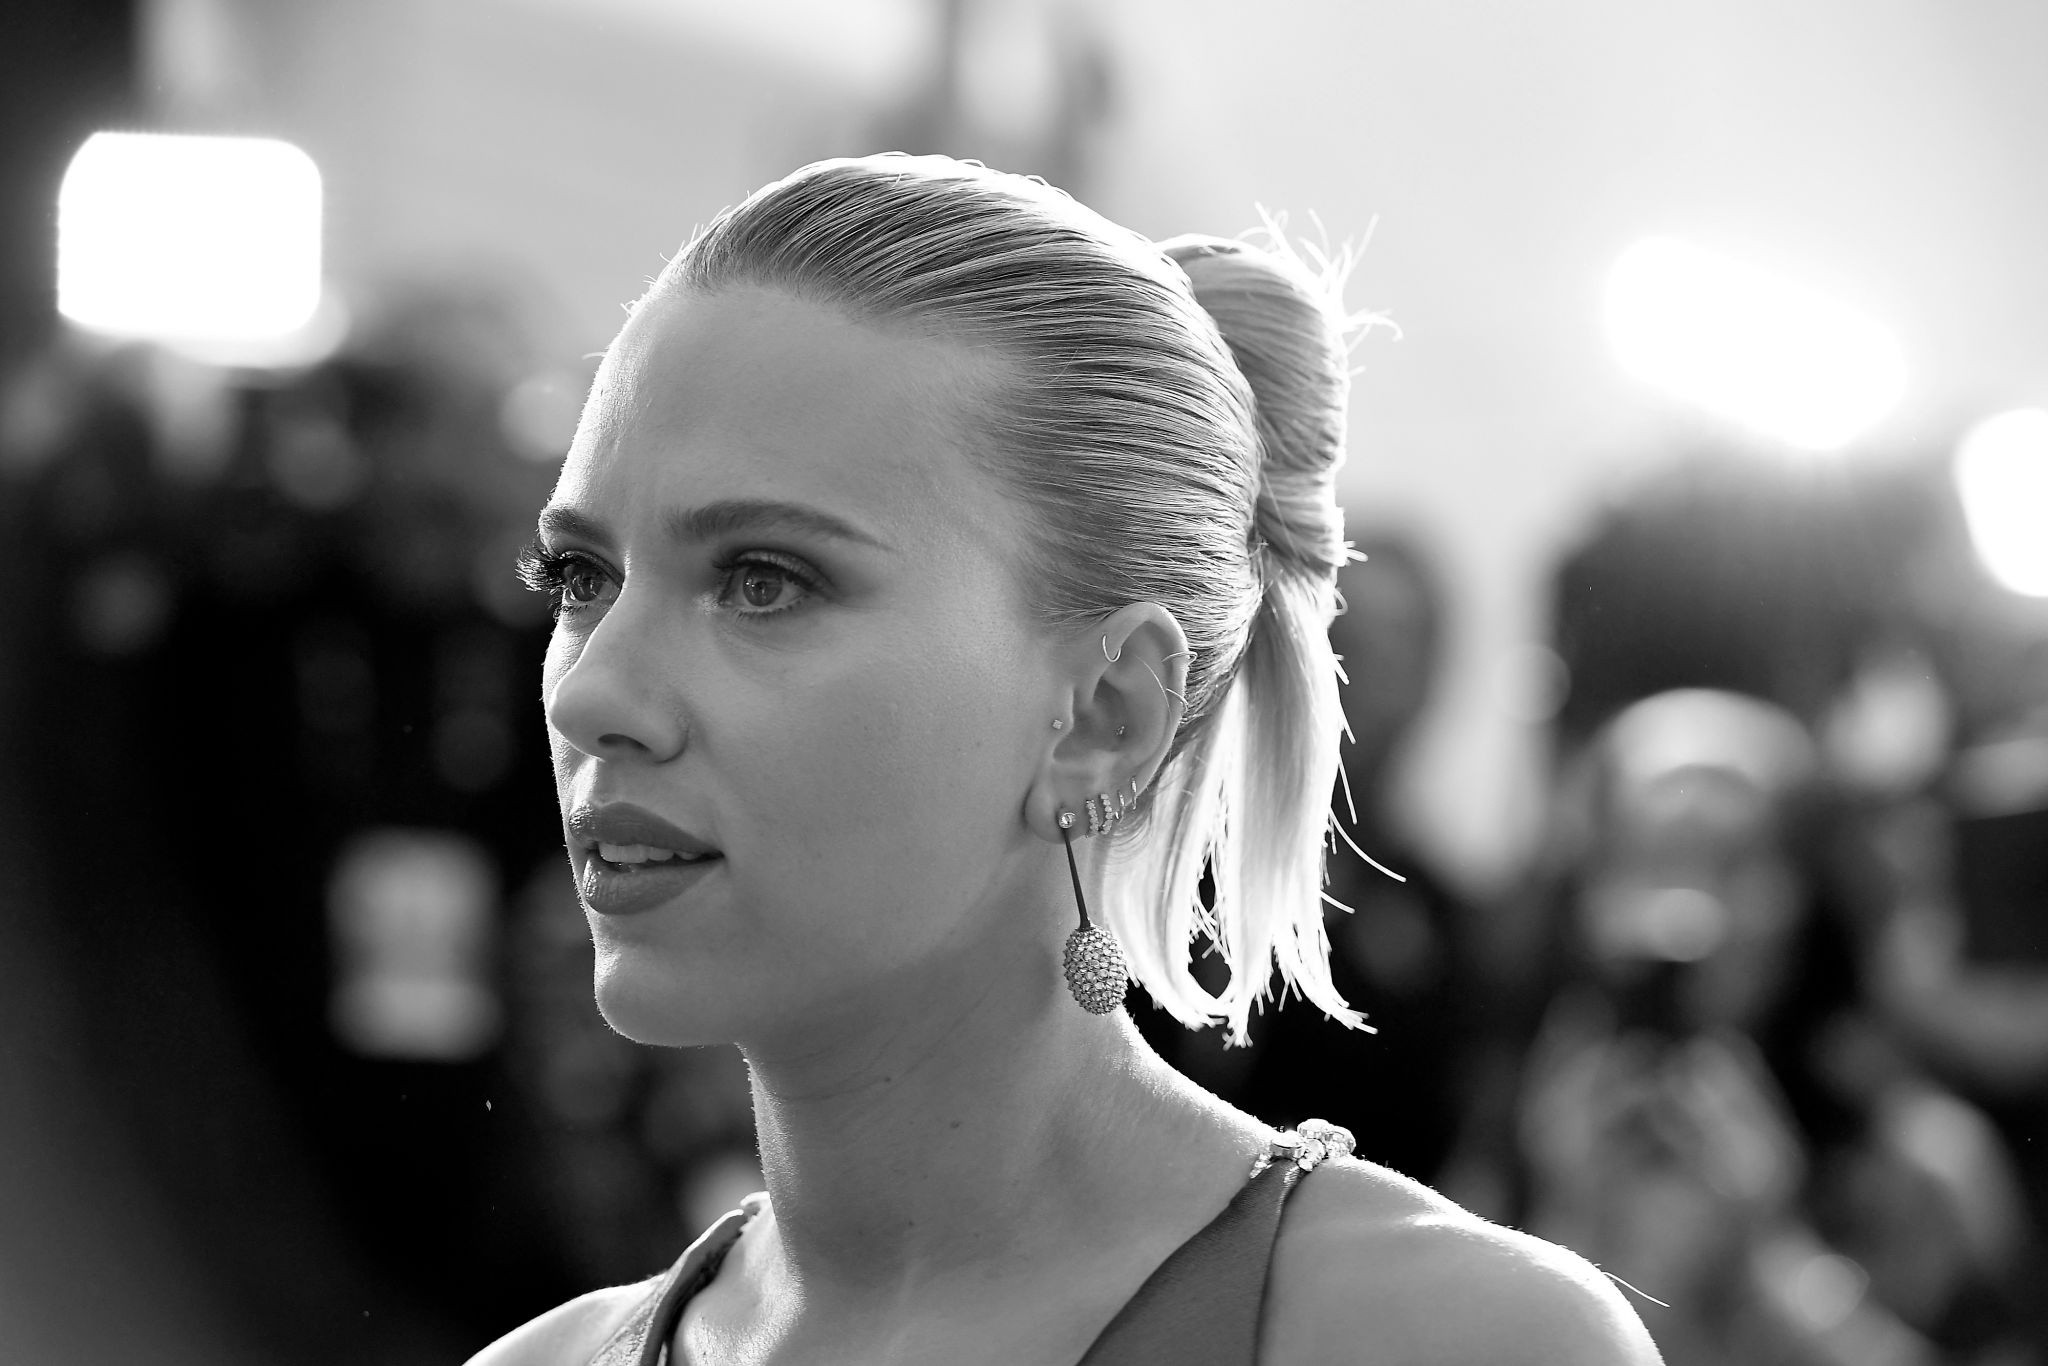 Scarlett Johansson Cleavage The Fappening Pro 12 - Scarlett Johansson Deep Cleavage (116 Photos)